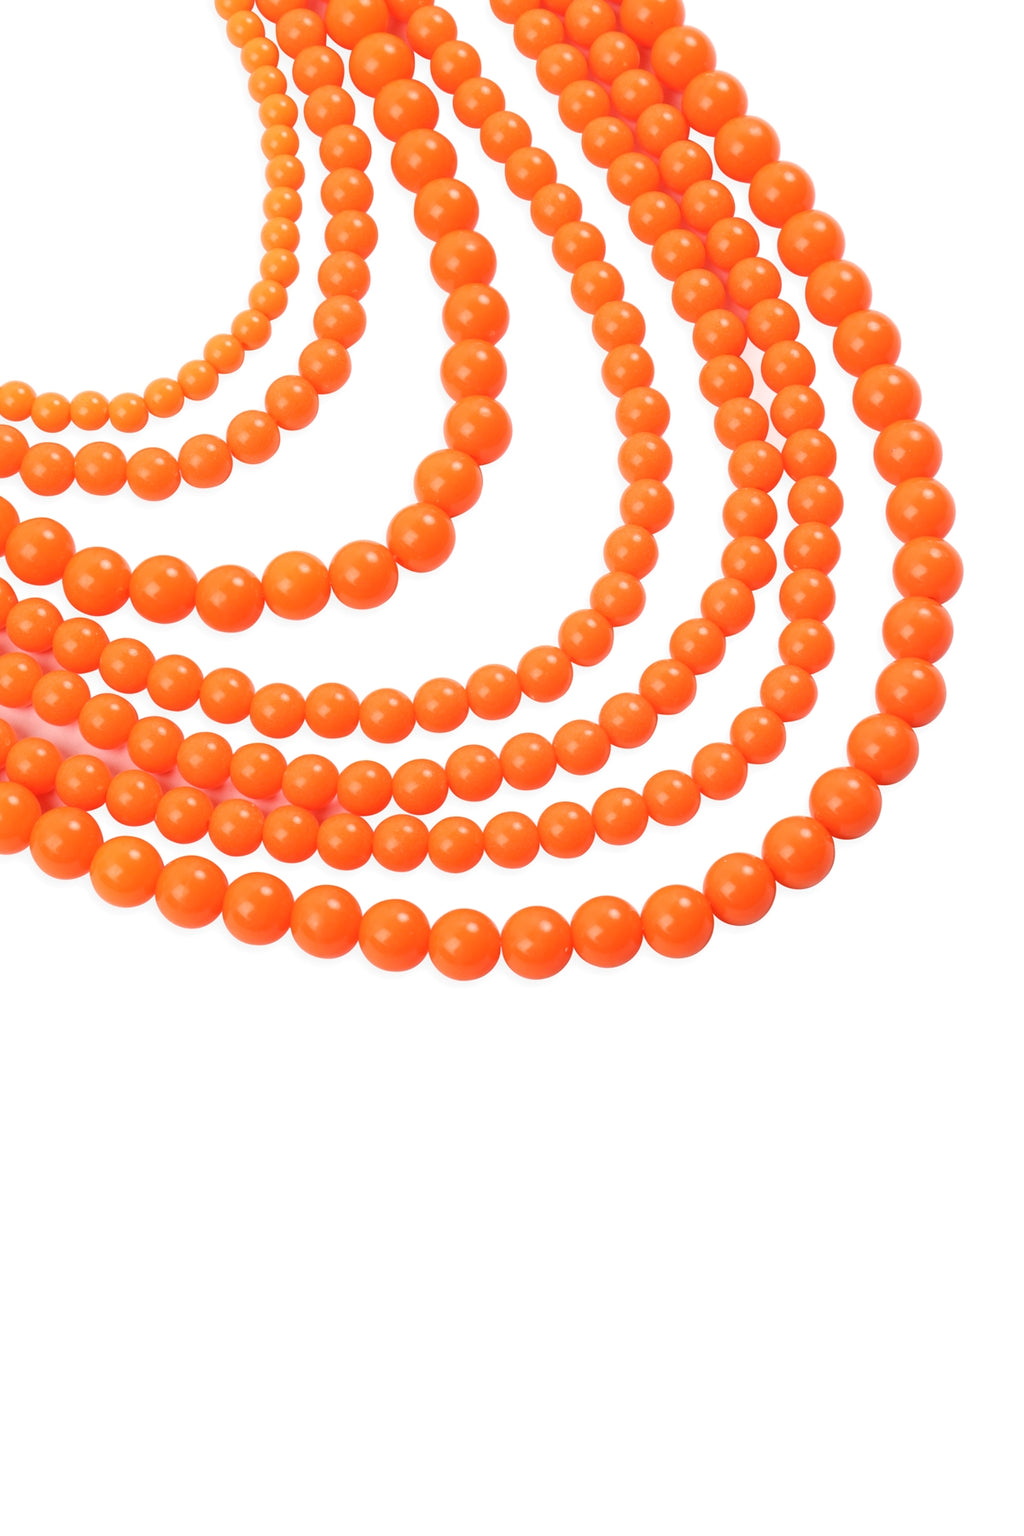 Multilayer Acrylic Necklace and Earring Set Orange - Pack of 6